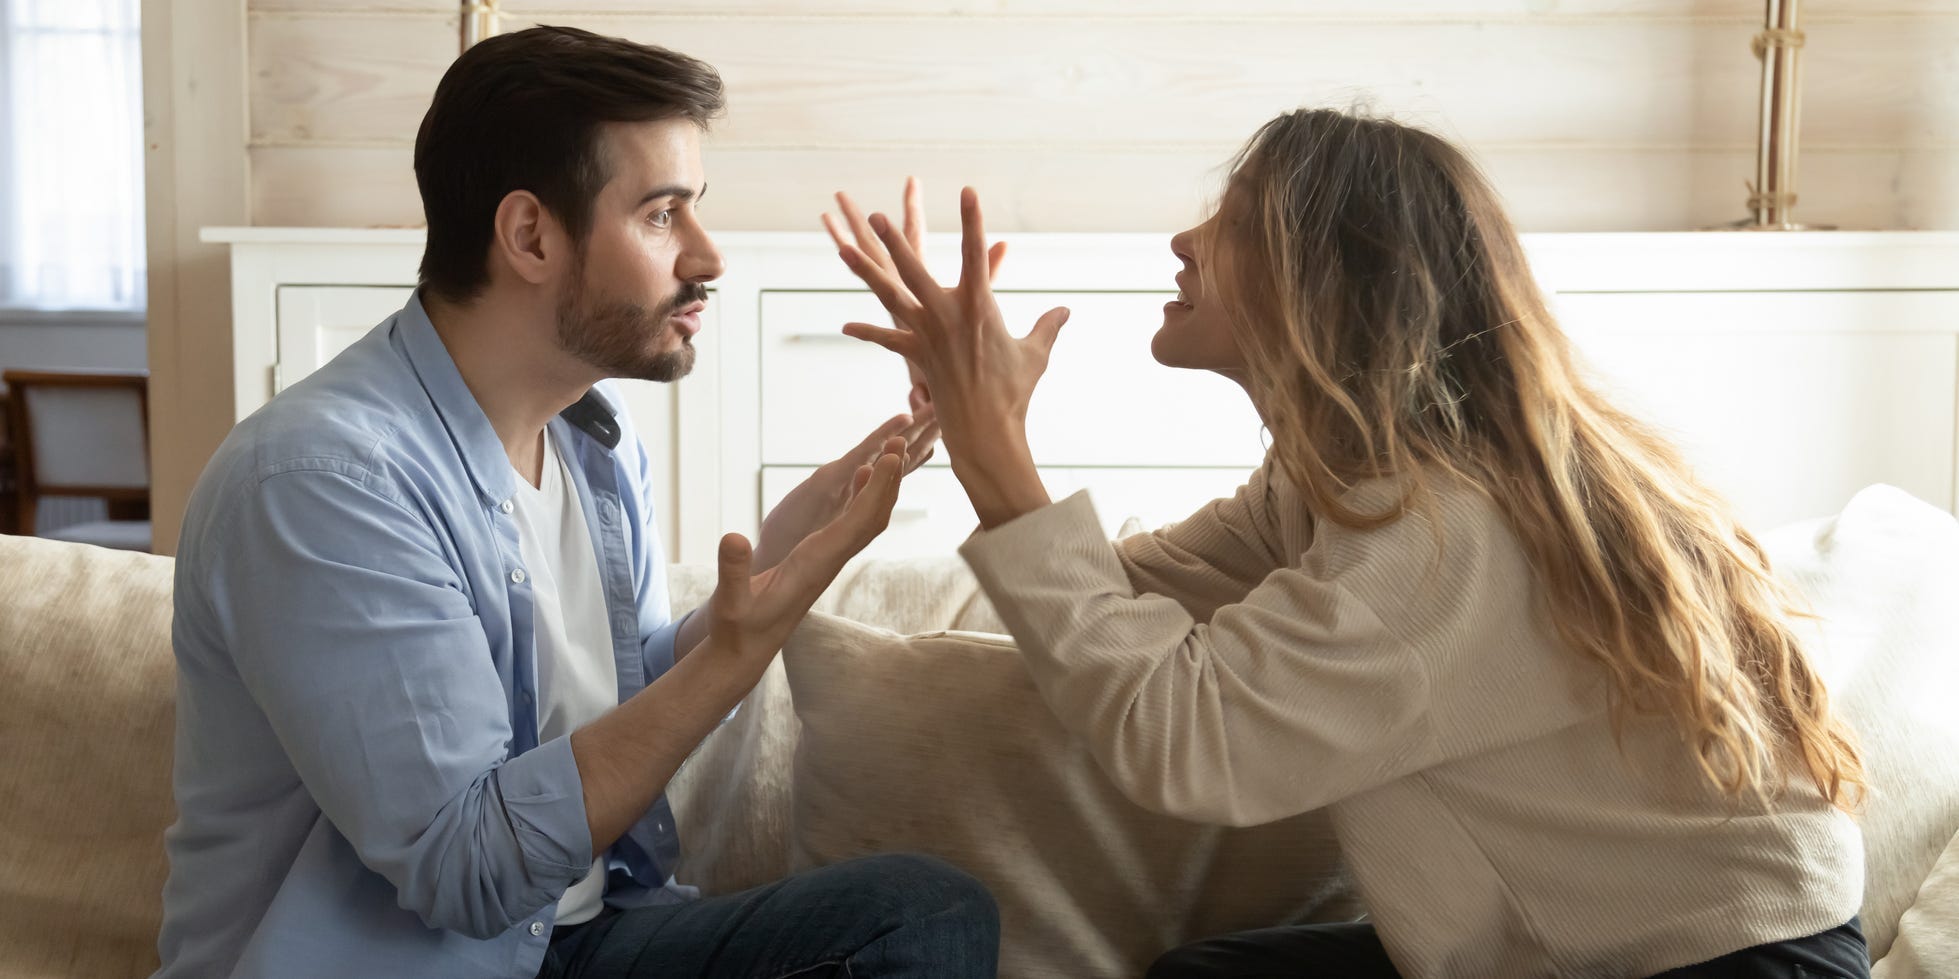 Abuse relationships emotional manipulation in 10 Signs